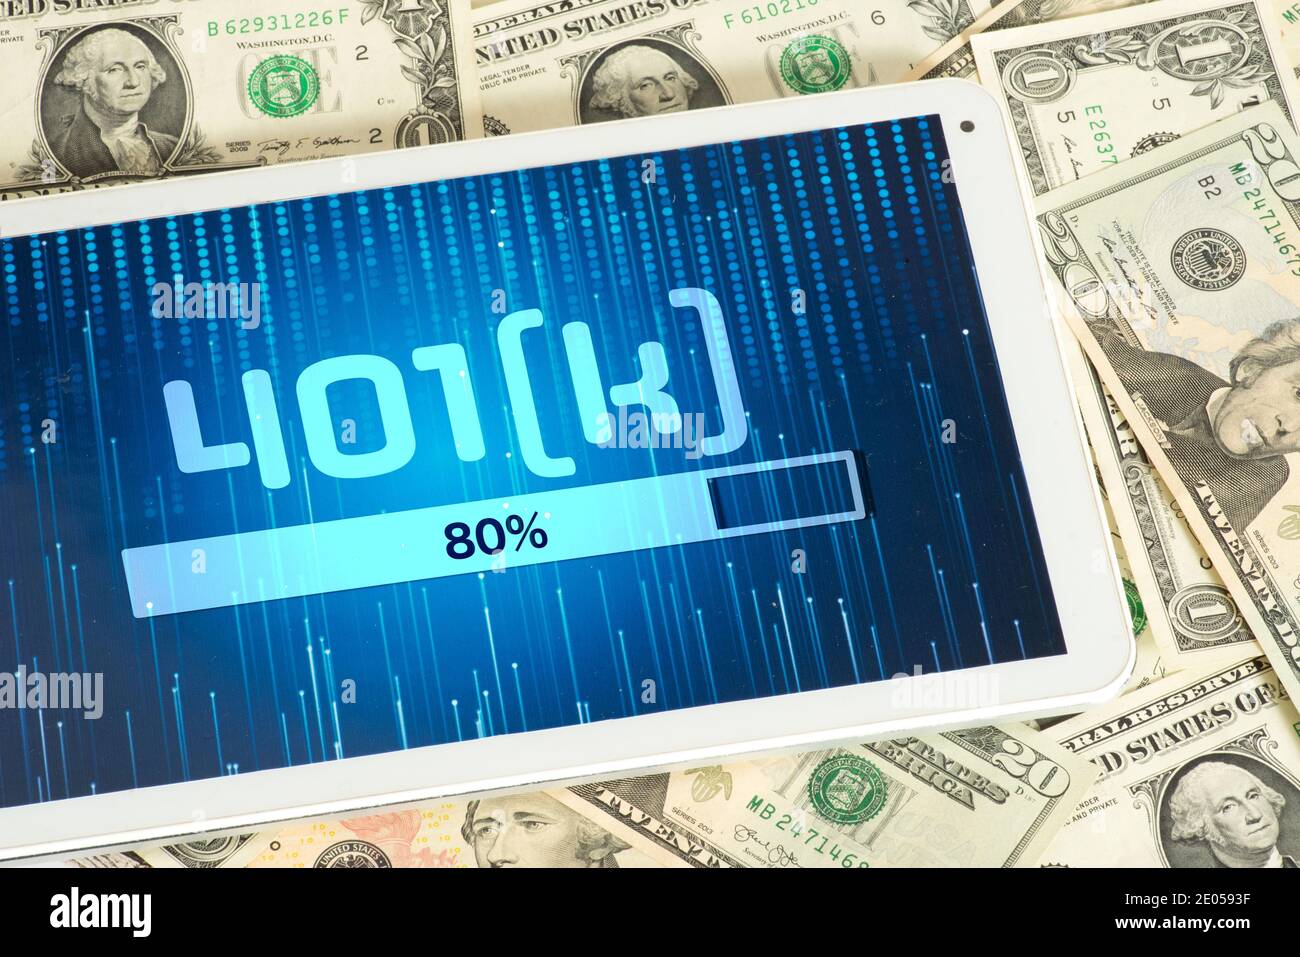 Dollar bills, tablet pc and 401k annuity plan Stock Photo